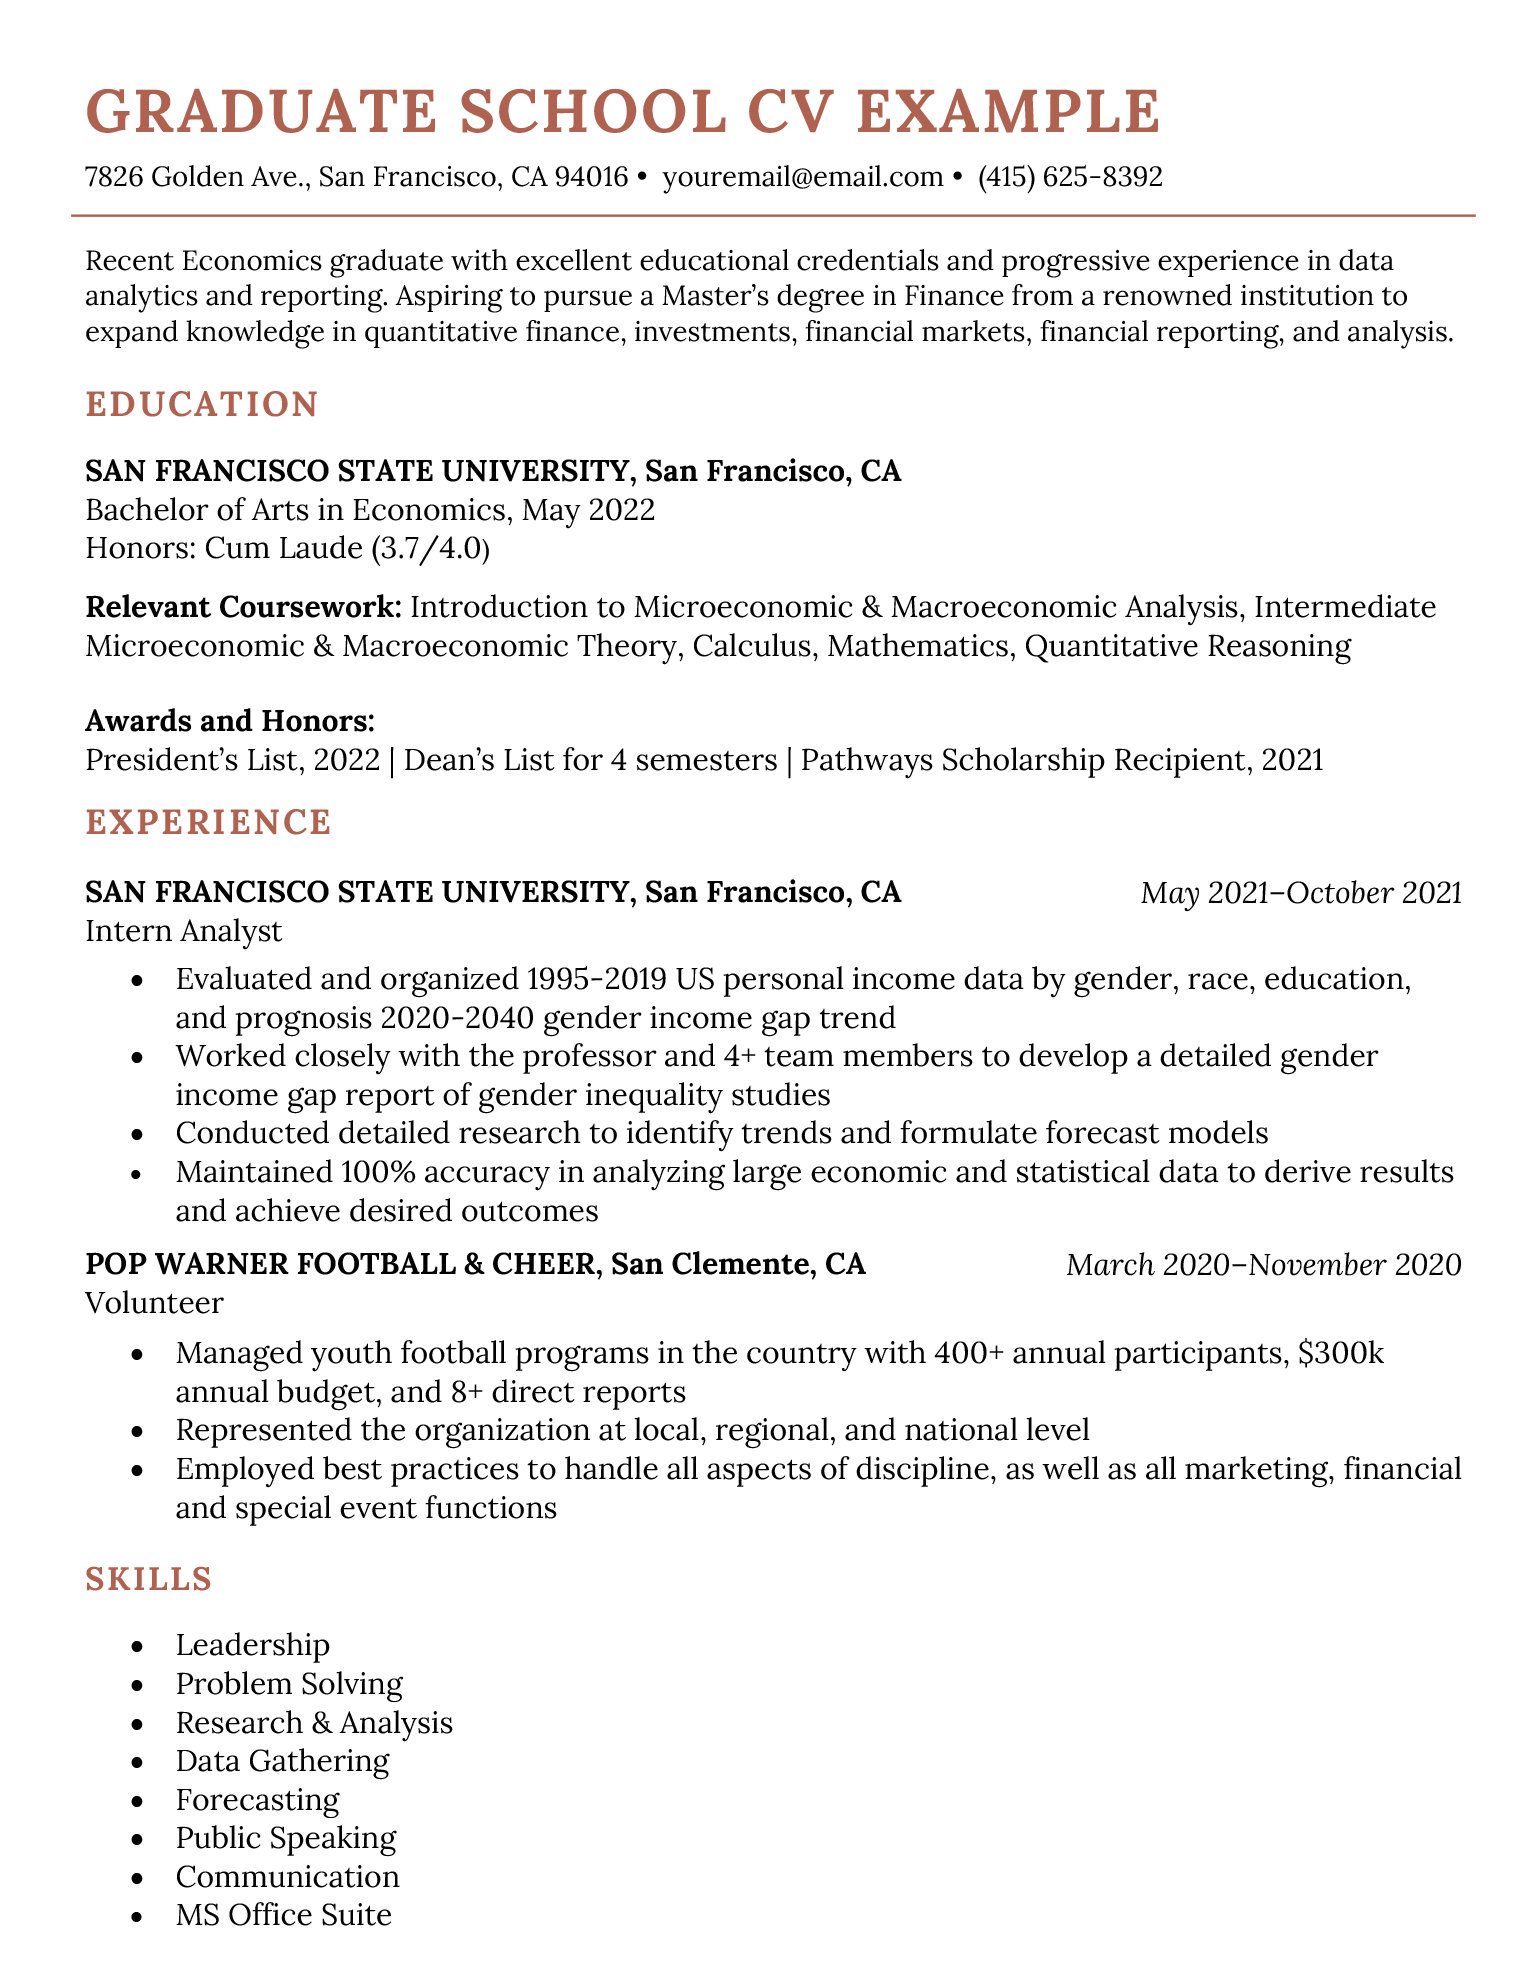 Graduate school CV example, featuring an extensive education section and formal design.